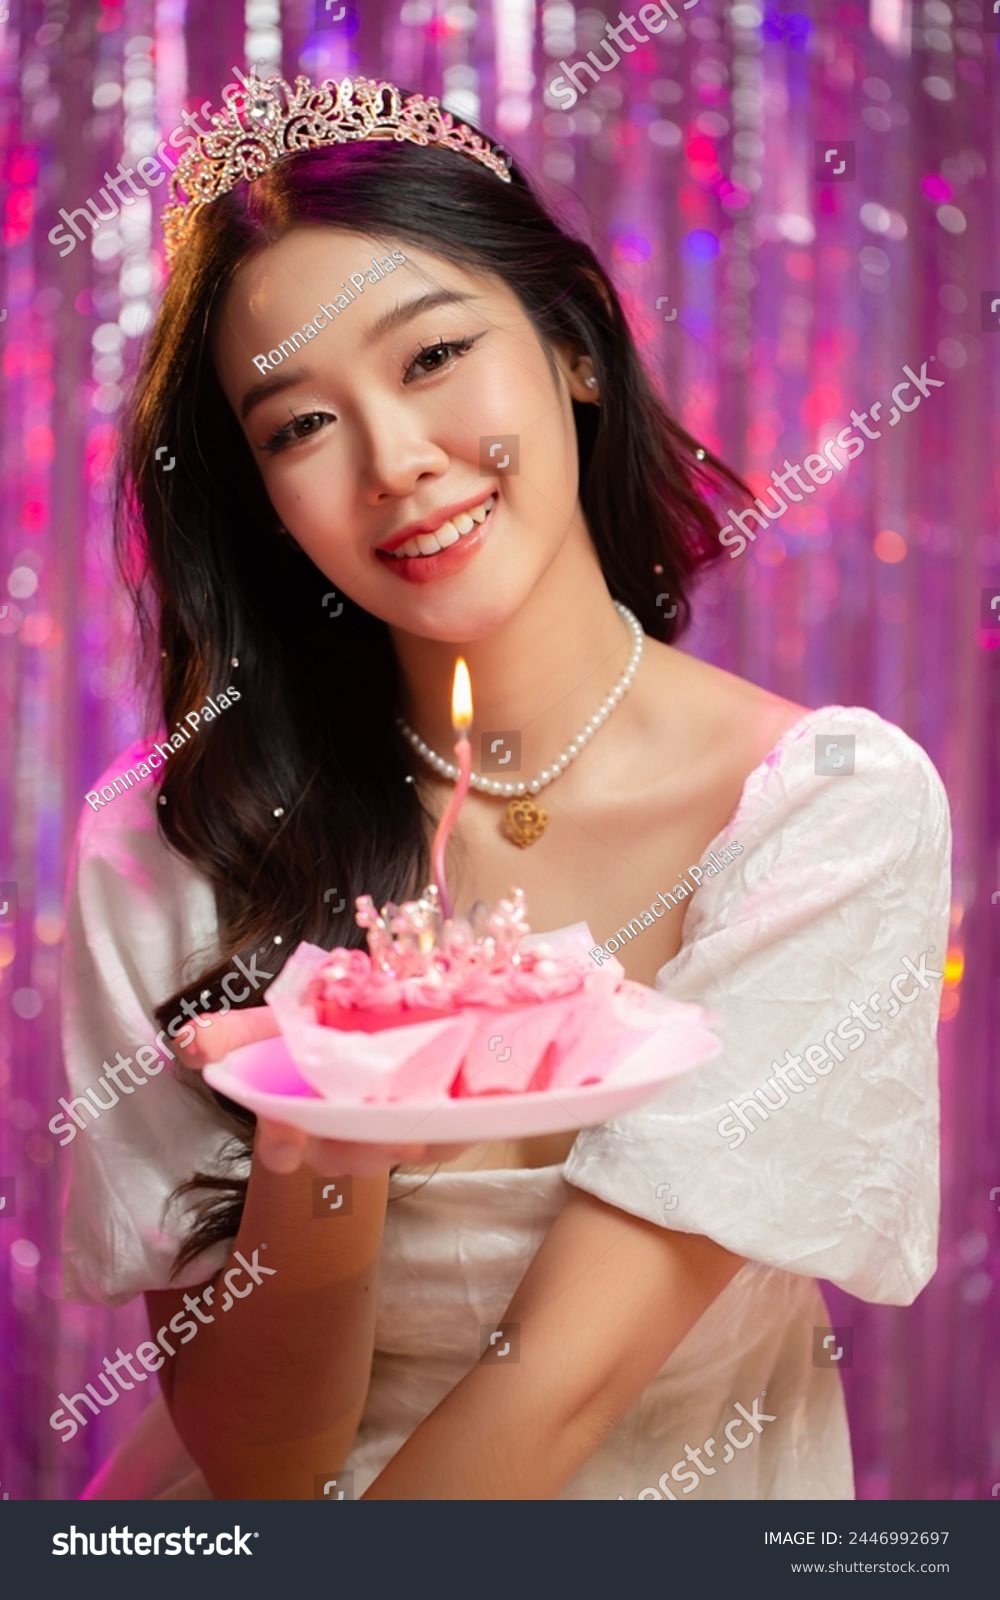 Happy beautiful Asian girl in princess dress showing birthday cake. Birthday princess photography theme is popular in social network. #2446992697